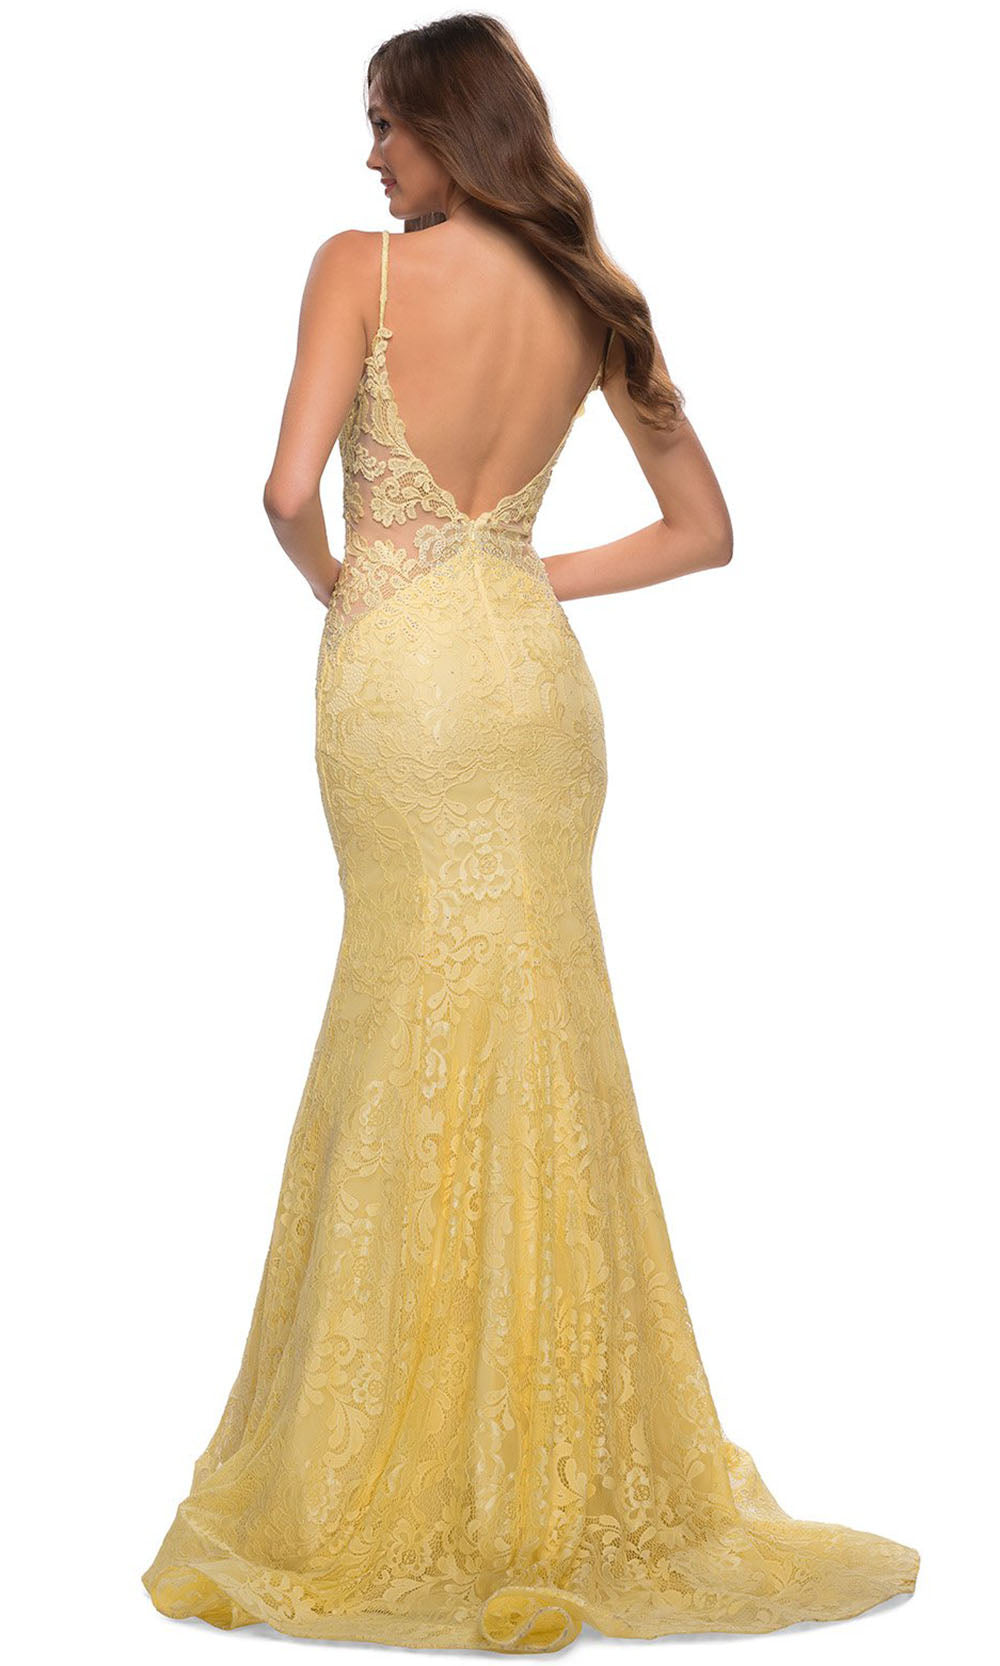 La Femme - 28355 Sparkly Lace Illusion Bodice Mermaid Gown In Yellow